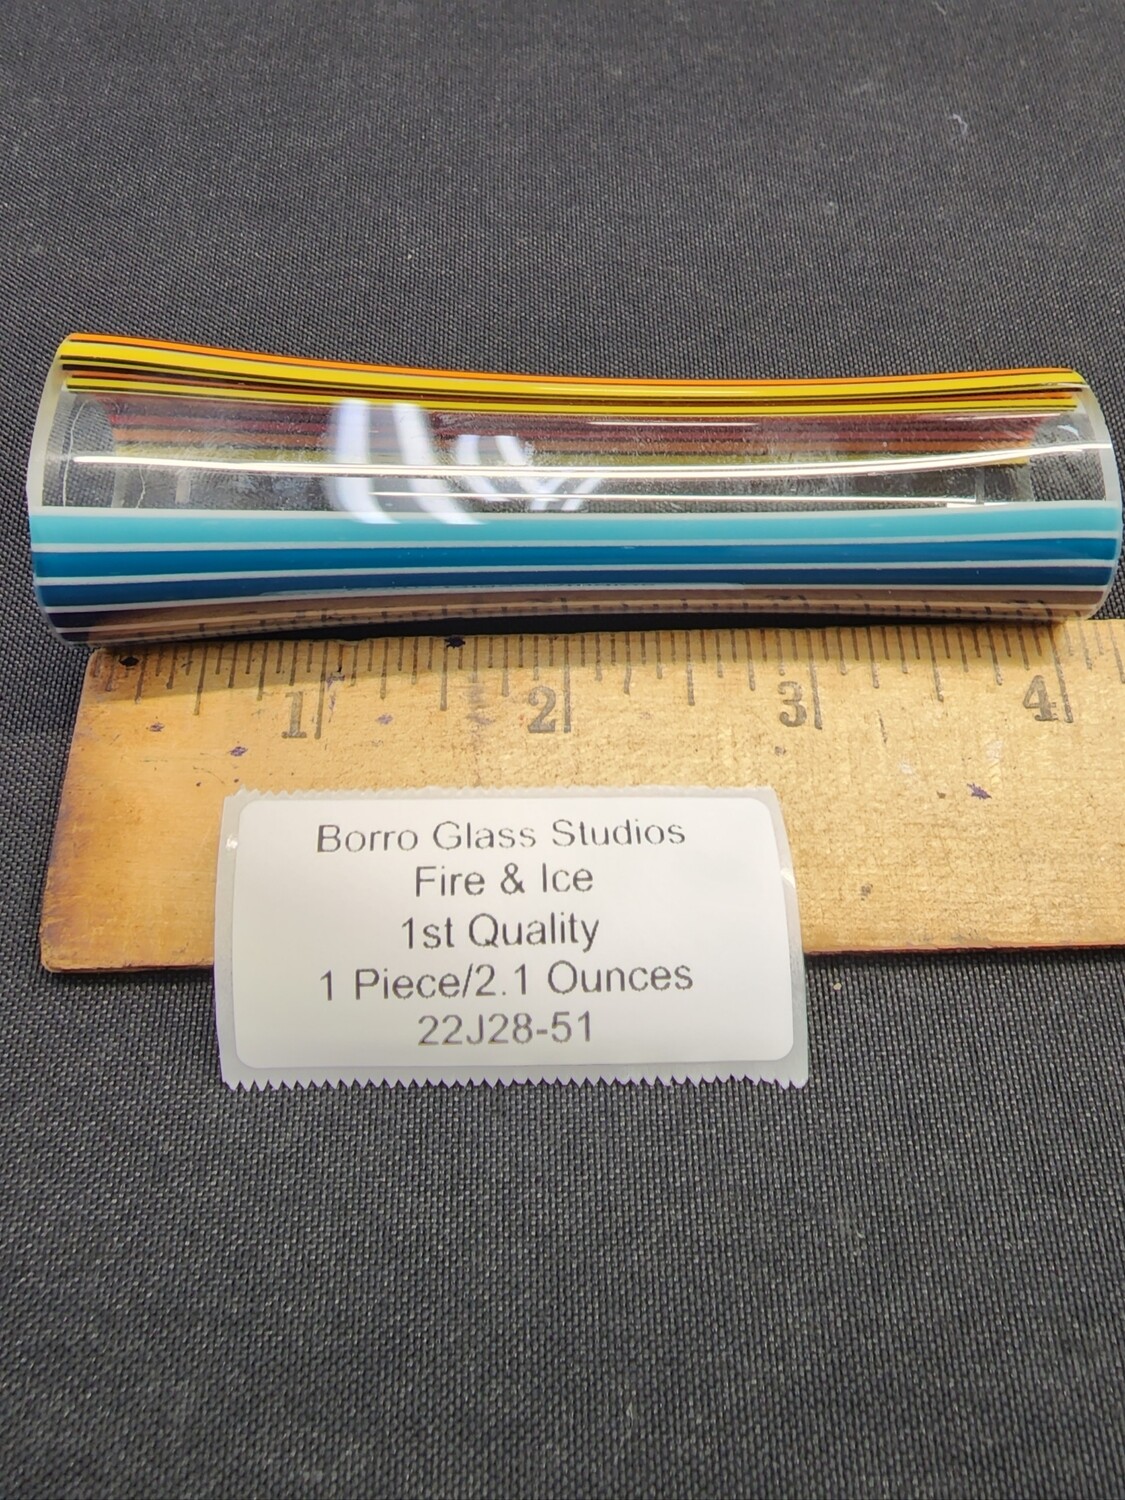 Fire & Ice Boro Vac Stacked Line Tubing - 1st Quality - 2.1 Ounces